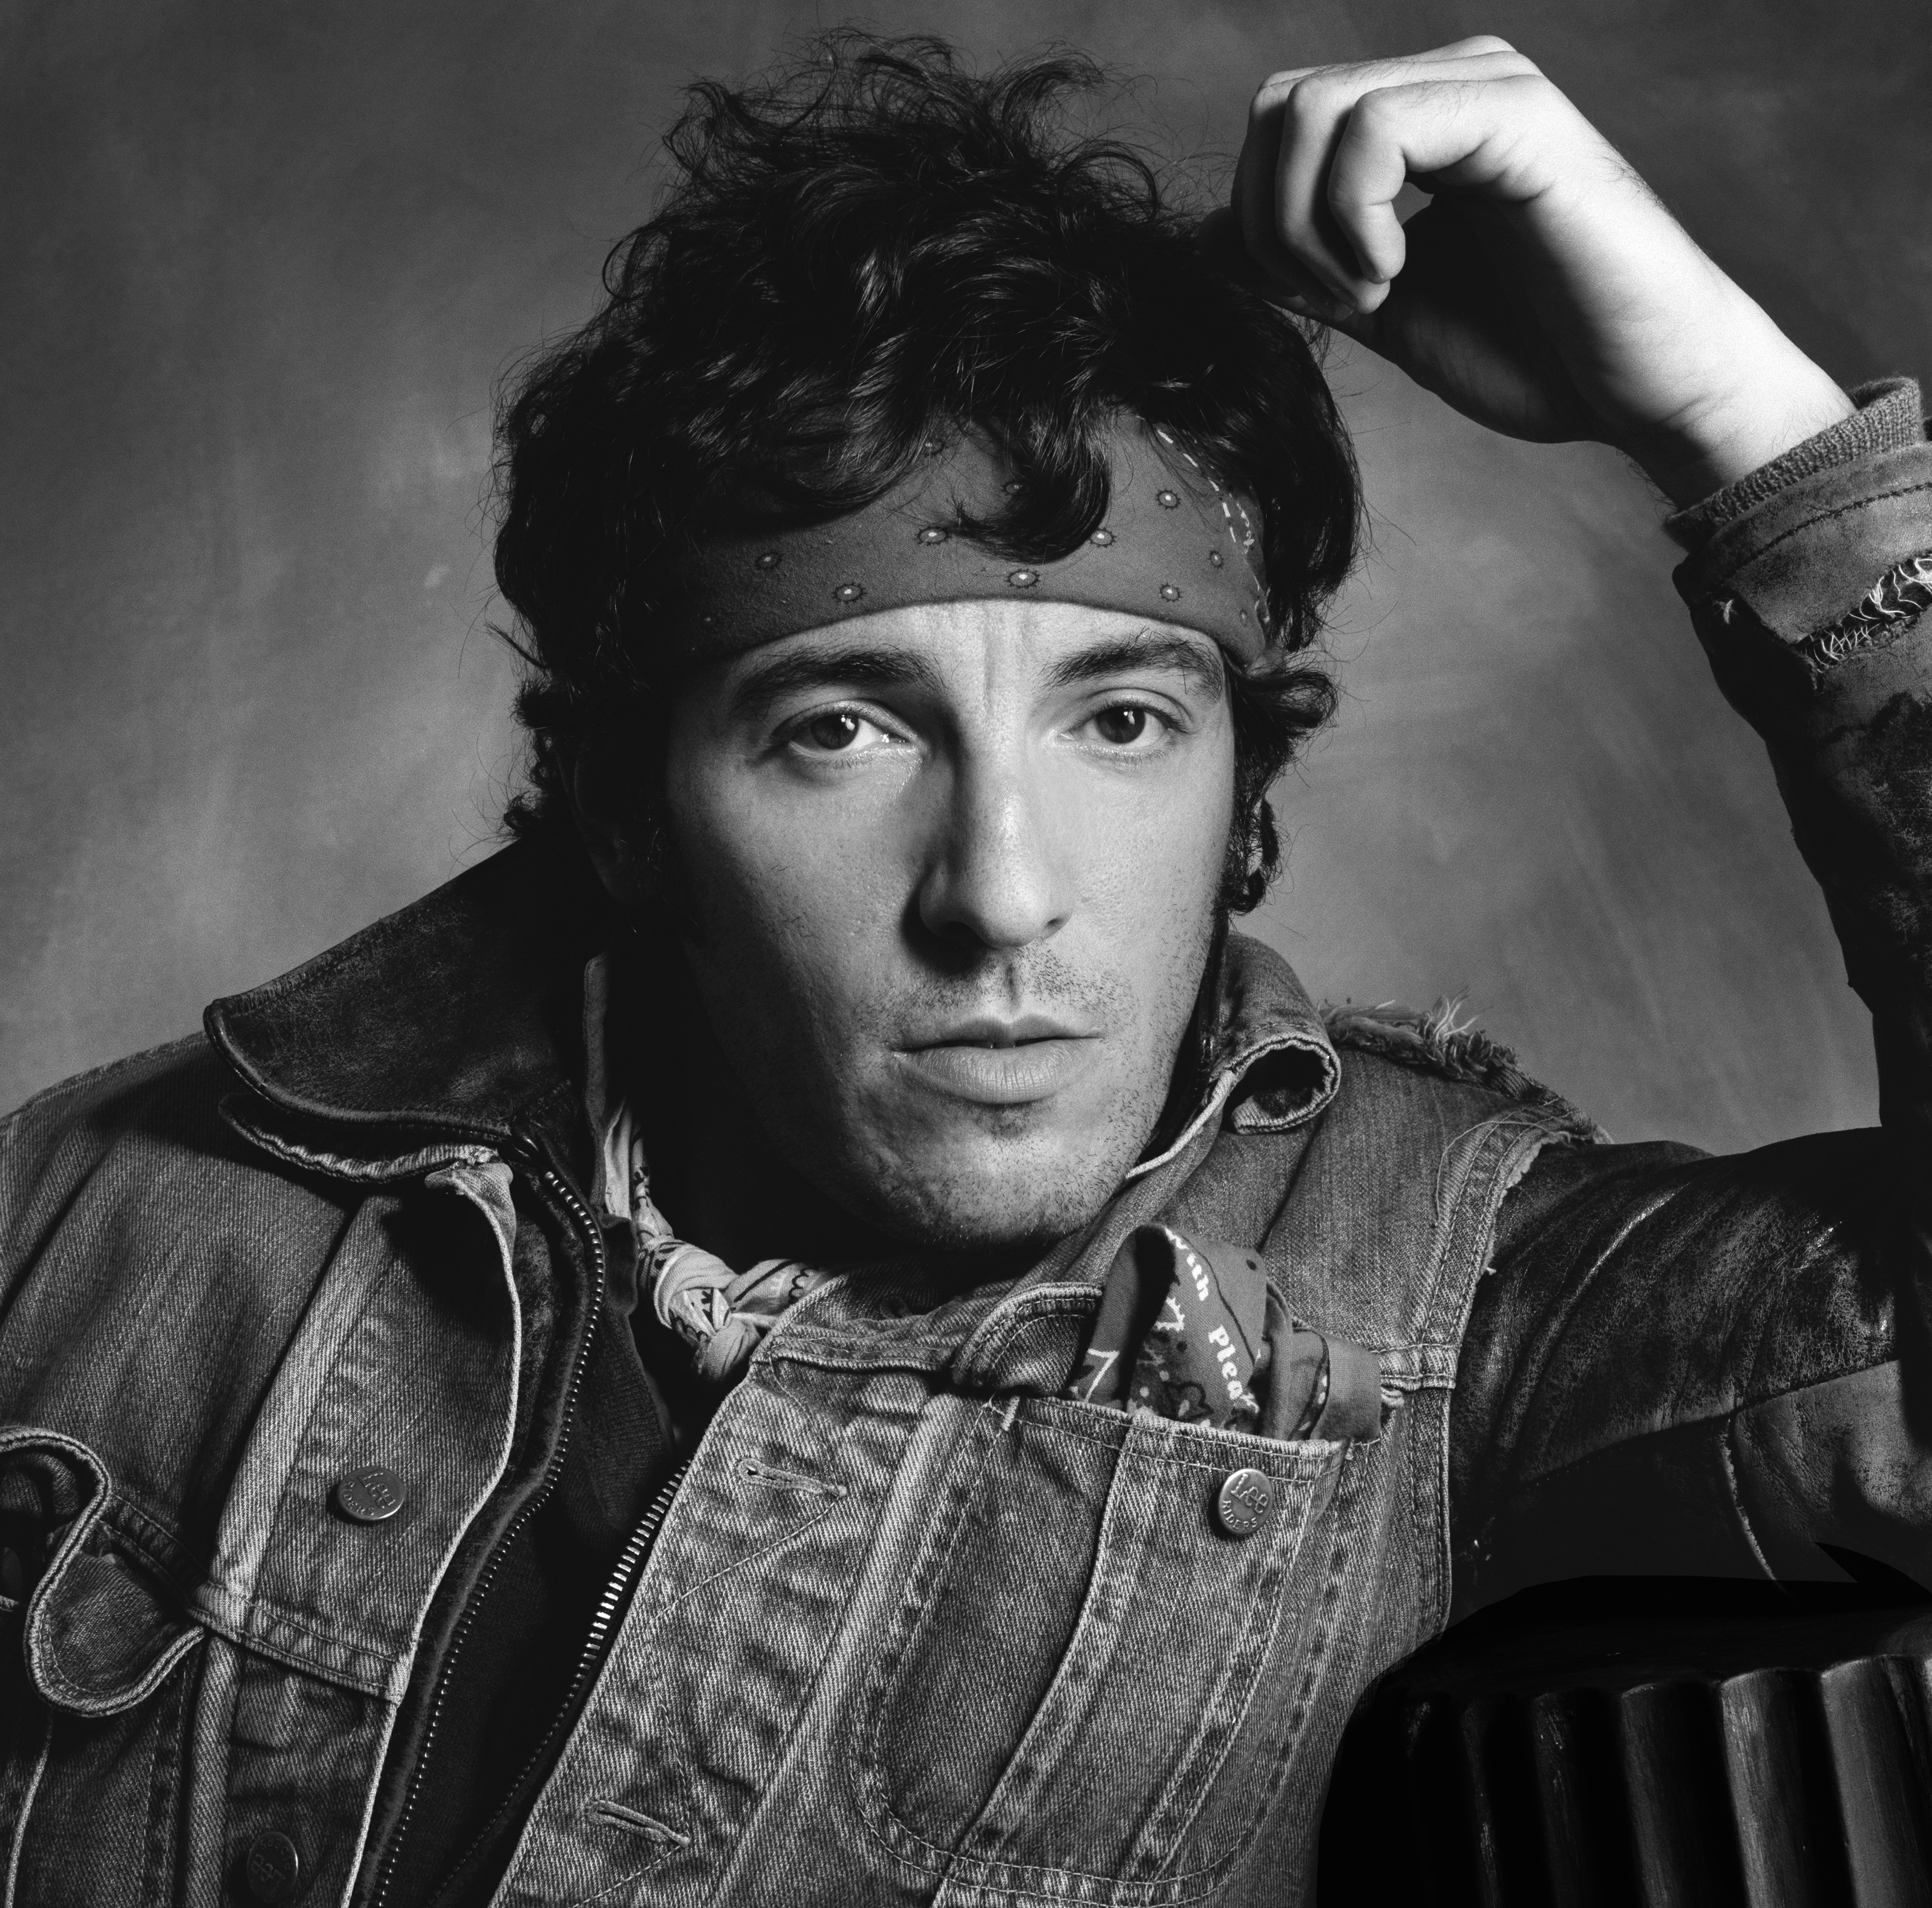 Celebrate Bruce Springsteen's 73rd birthday with a look back at